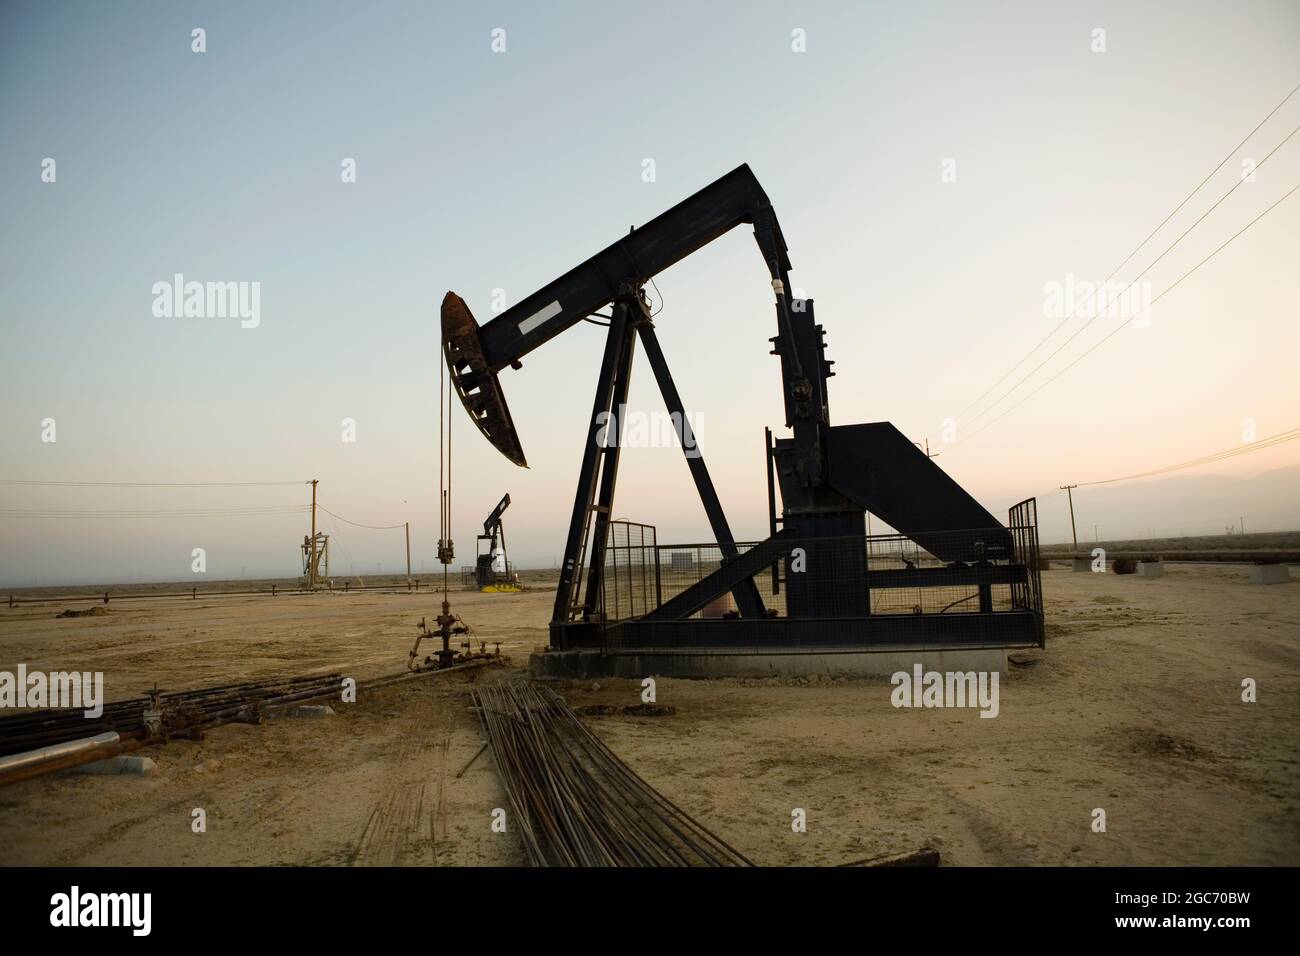 Silhouette of pump jack in oil field at sunset Stock Photo